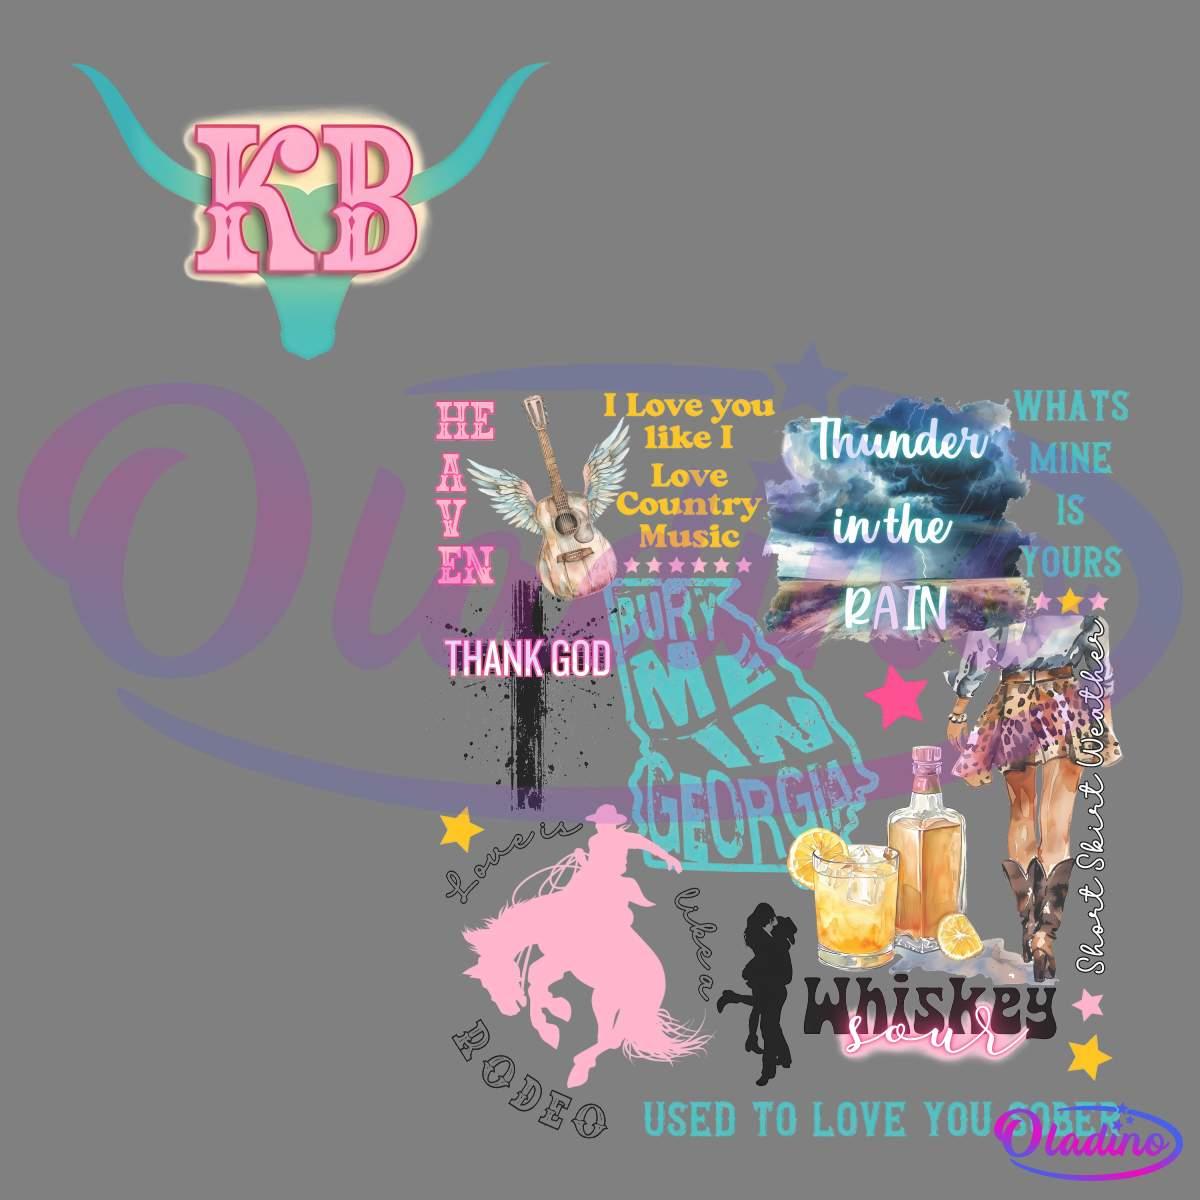 A collage featuring various country-themed elements: lyrics such as "Thunder in the Rain" and "Thank God," images of cowboy boots, a cowboy hat, whiskey bottles, a horse, and a figure of a person riding a horse. There is also a pink and teal "KB" logo at the top left.